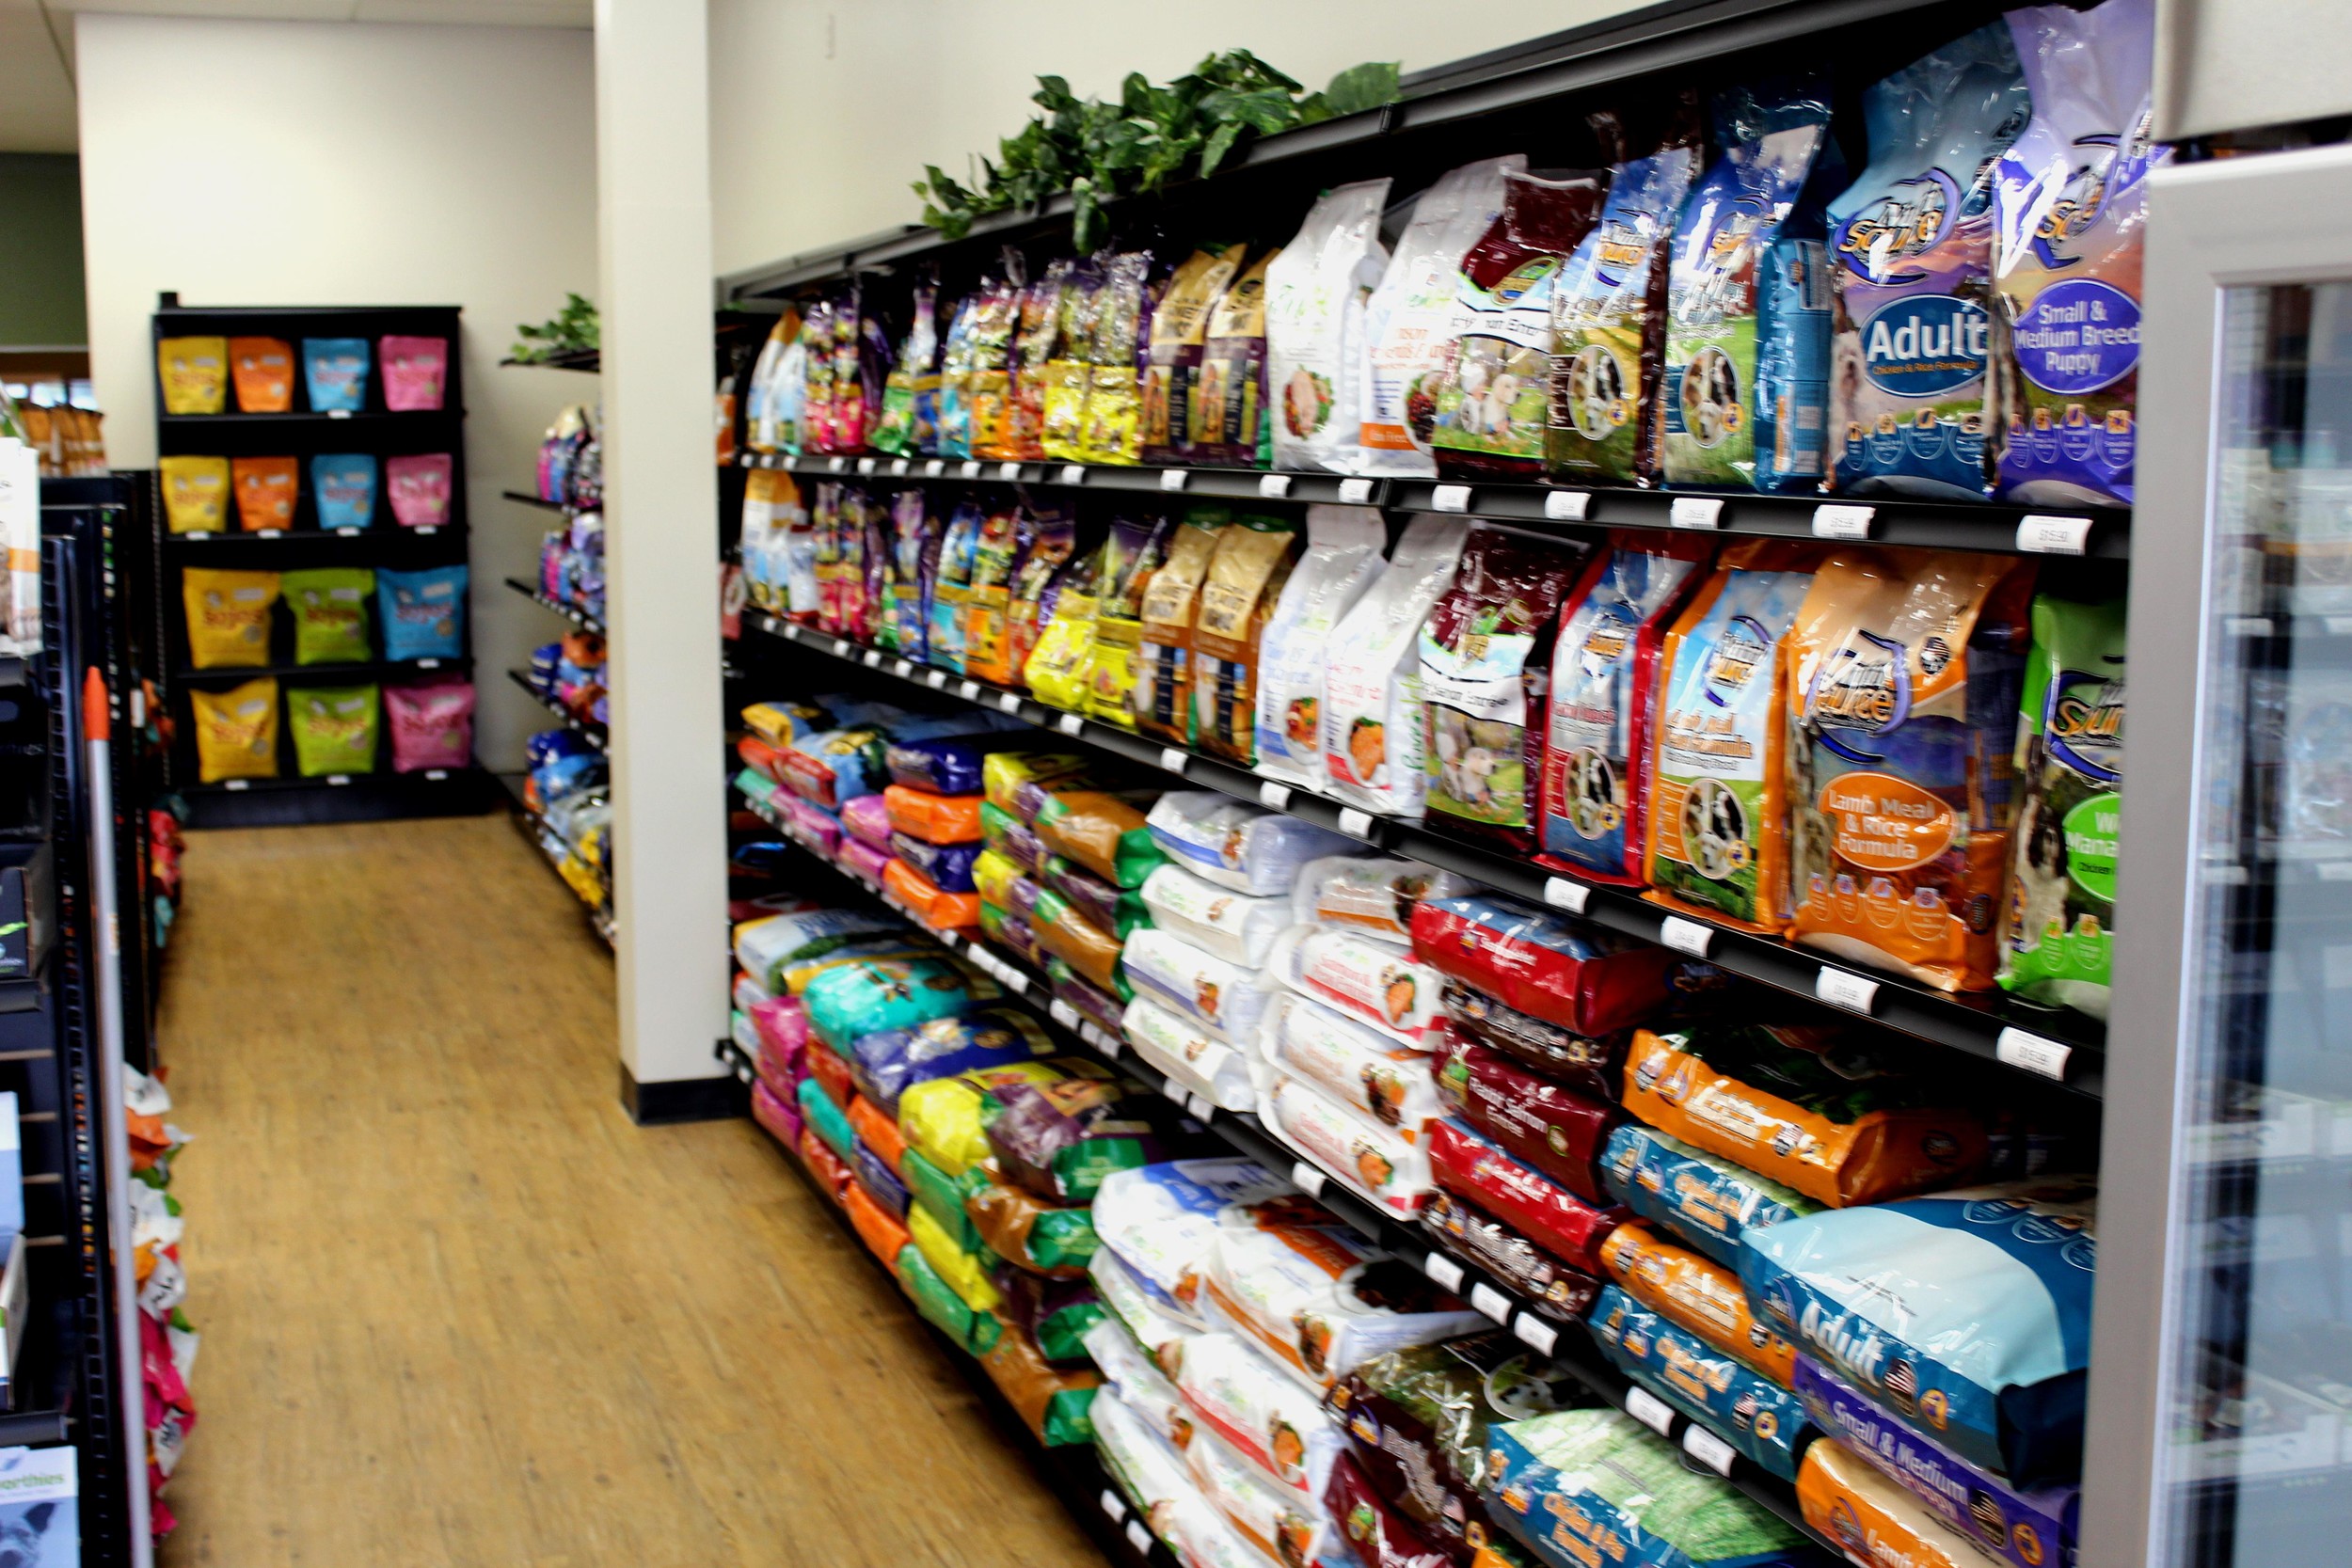 The newly opened EarthWise Pet Supply in Jacksonville Beach offers a wide variety of all-natural pet food, products and services.